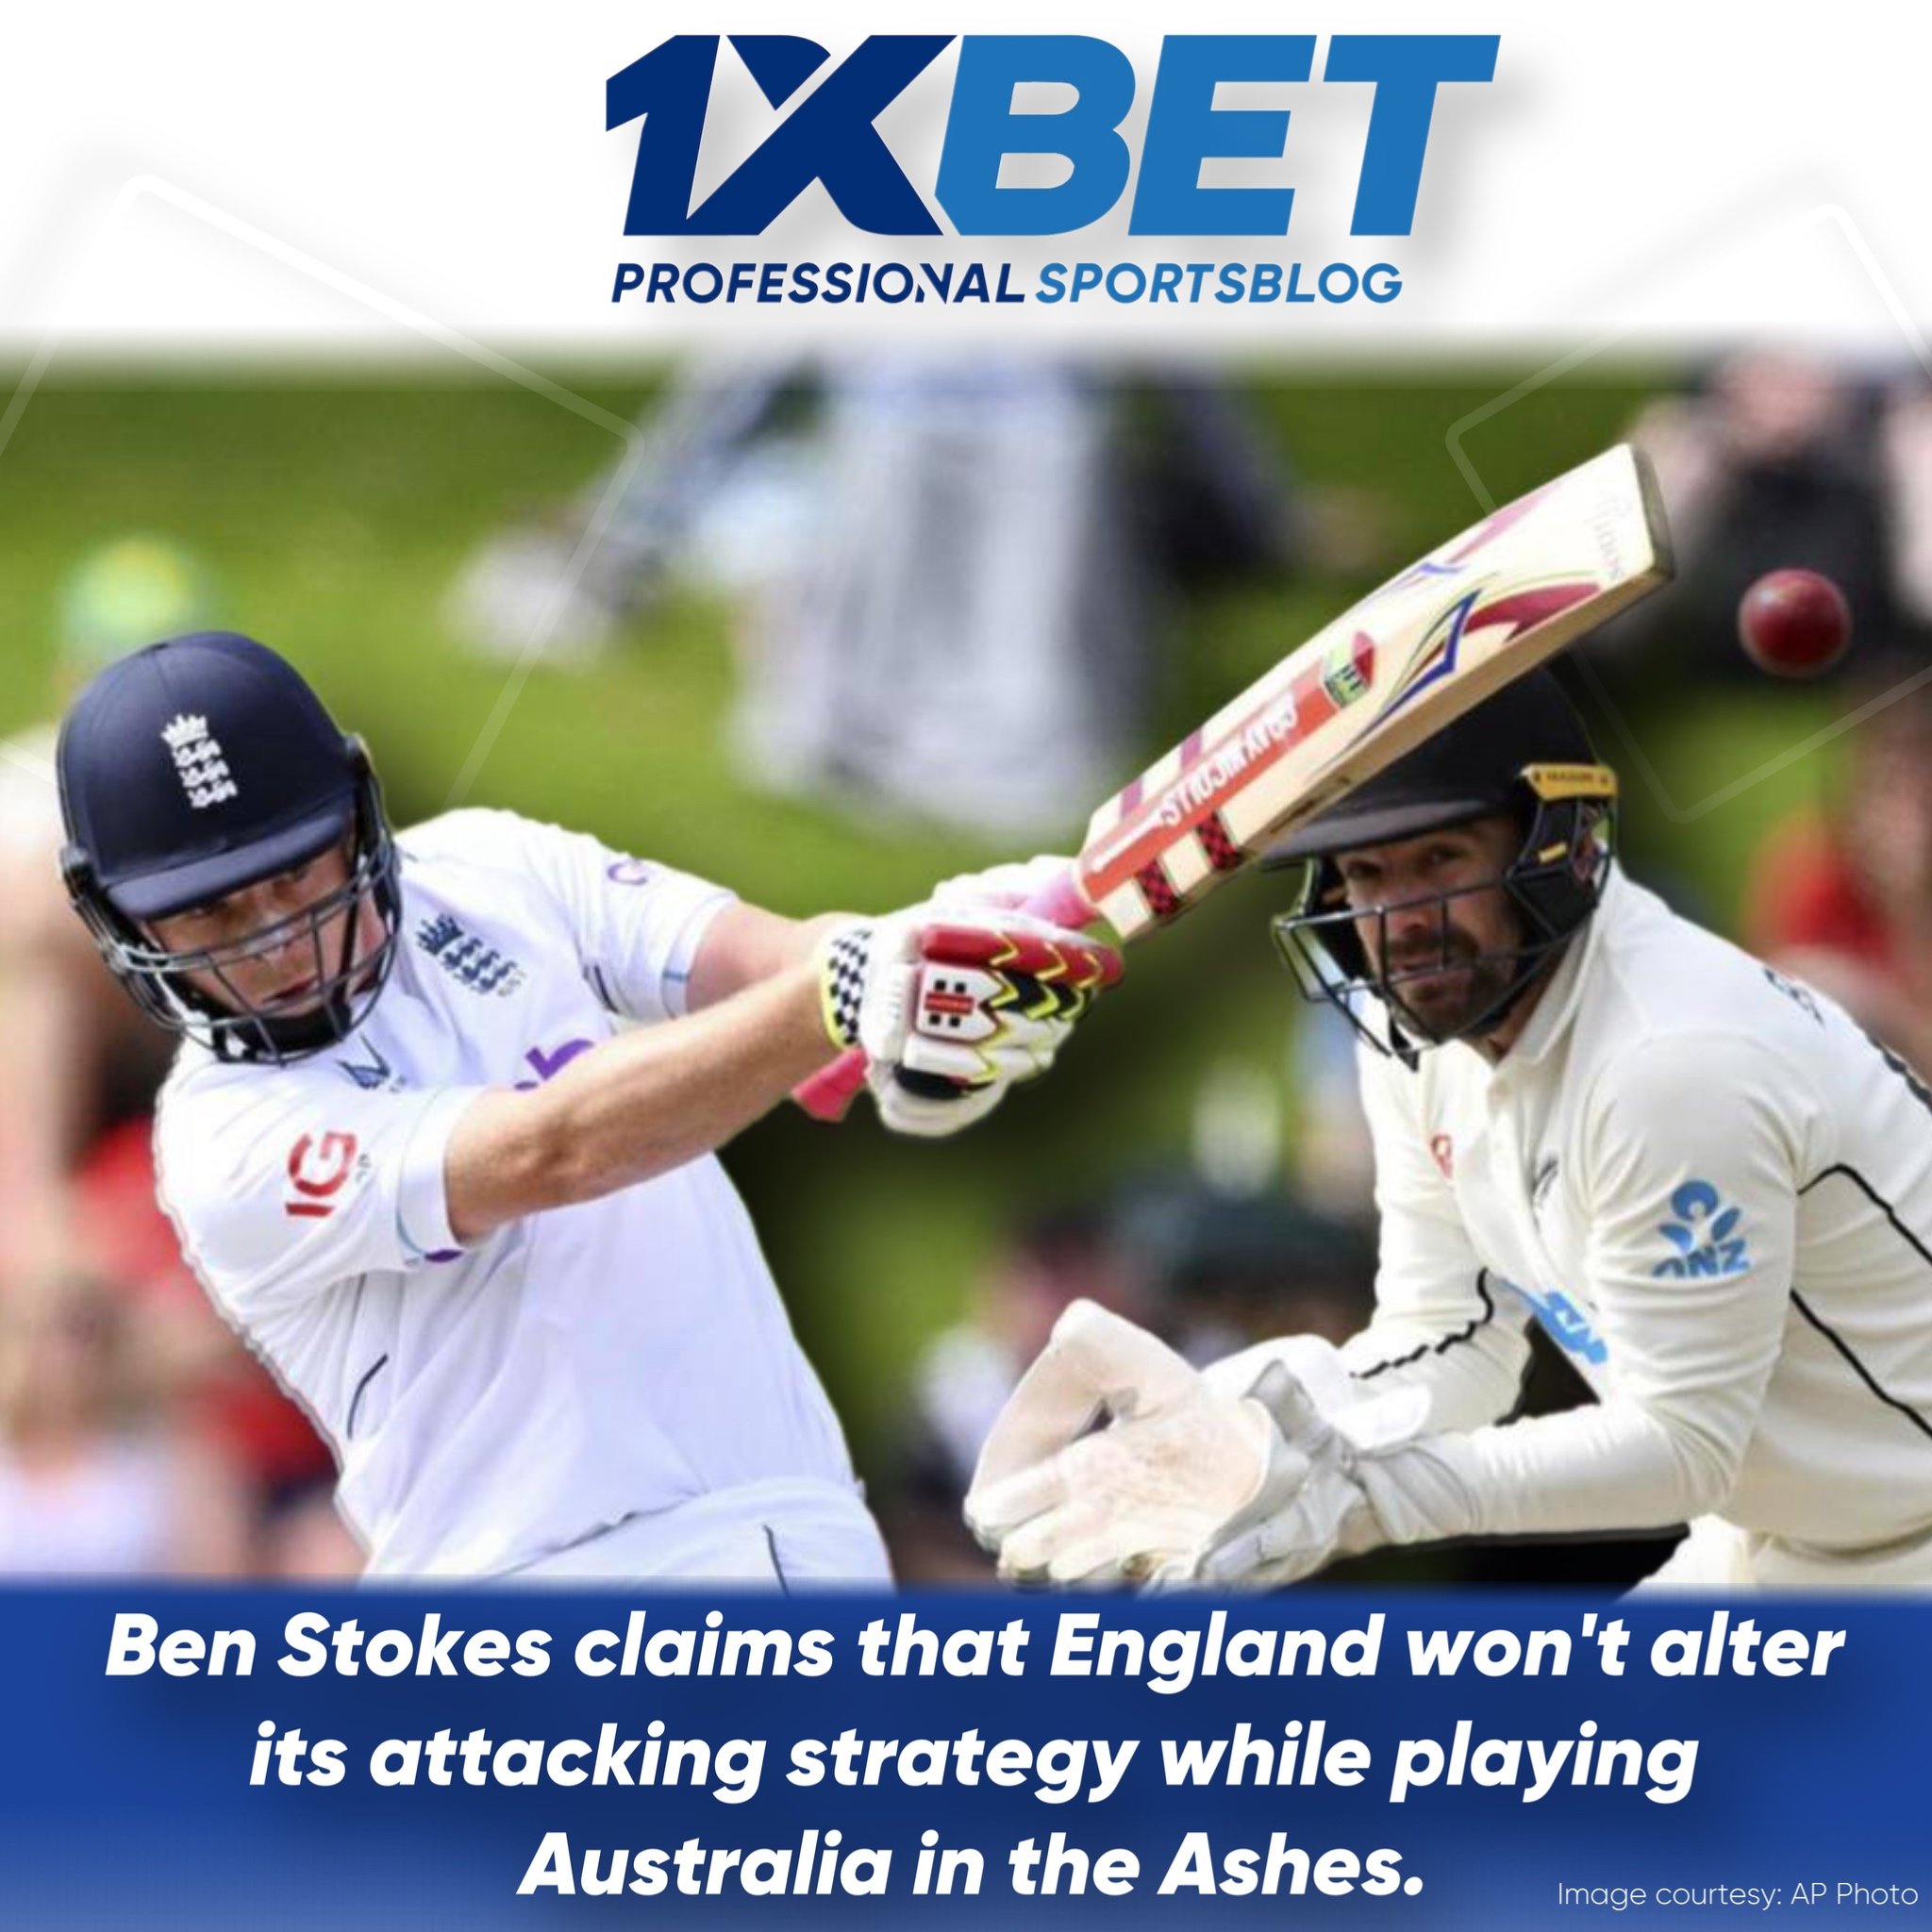 Ben Stokes claims that England won't alter its attacking strategy while playing Australia in the Ashes